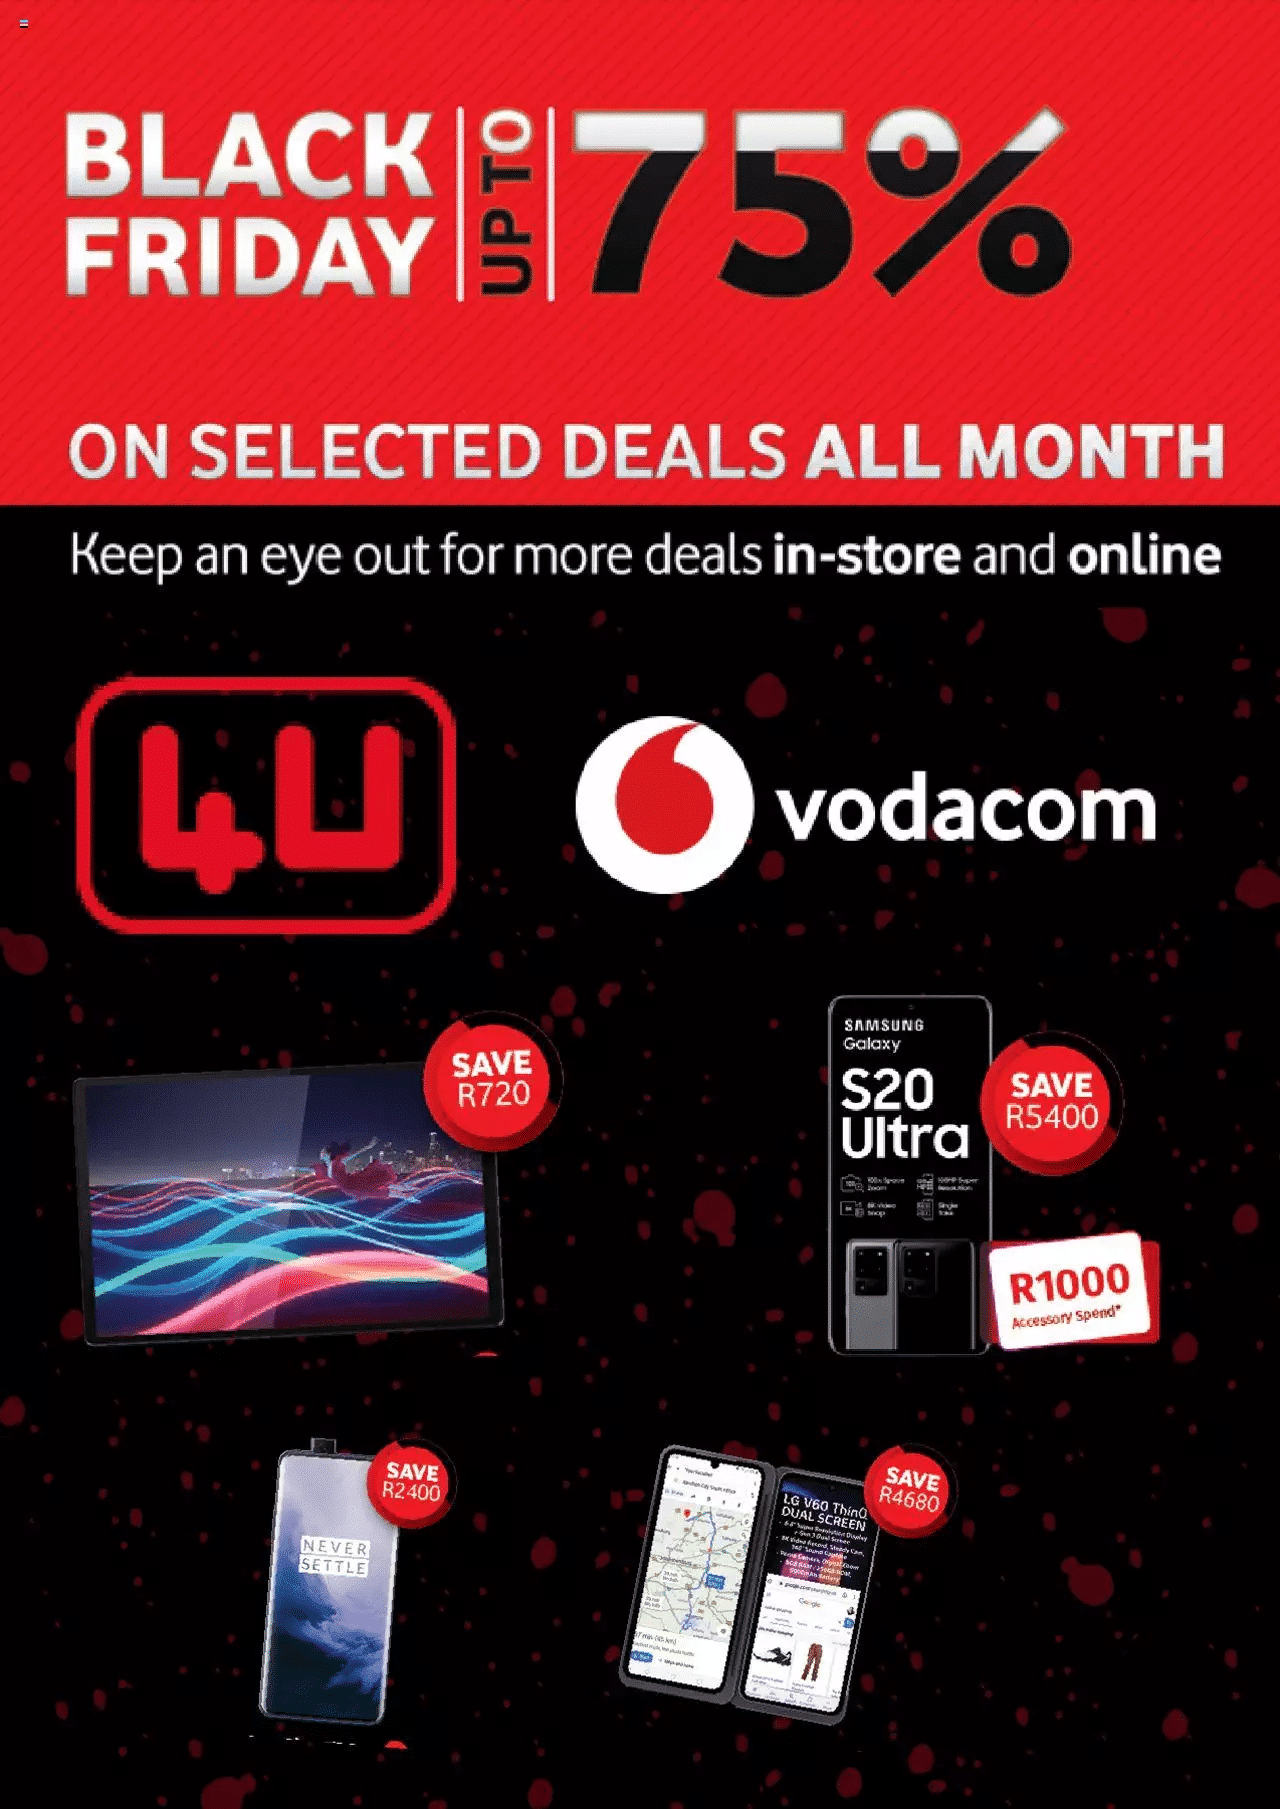 Vodacom Black Friday Deals & Specials 2021 - What Are The Black Friday Deals Today